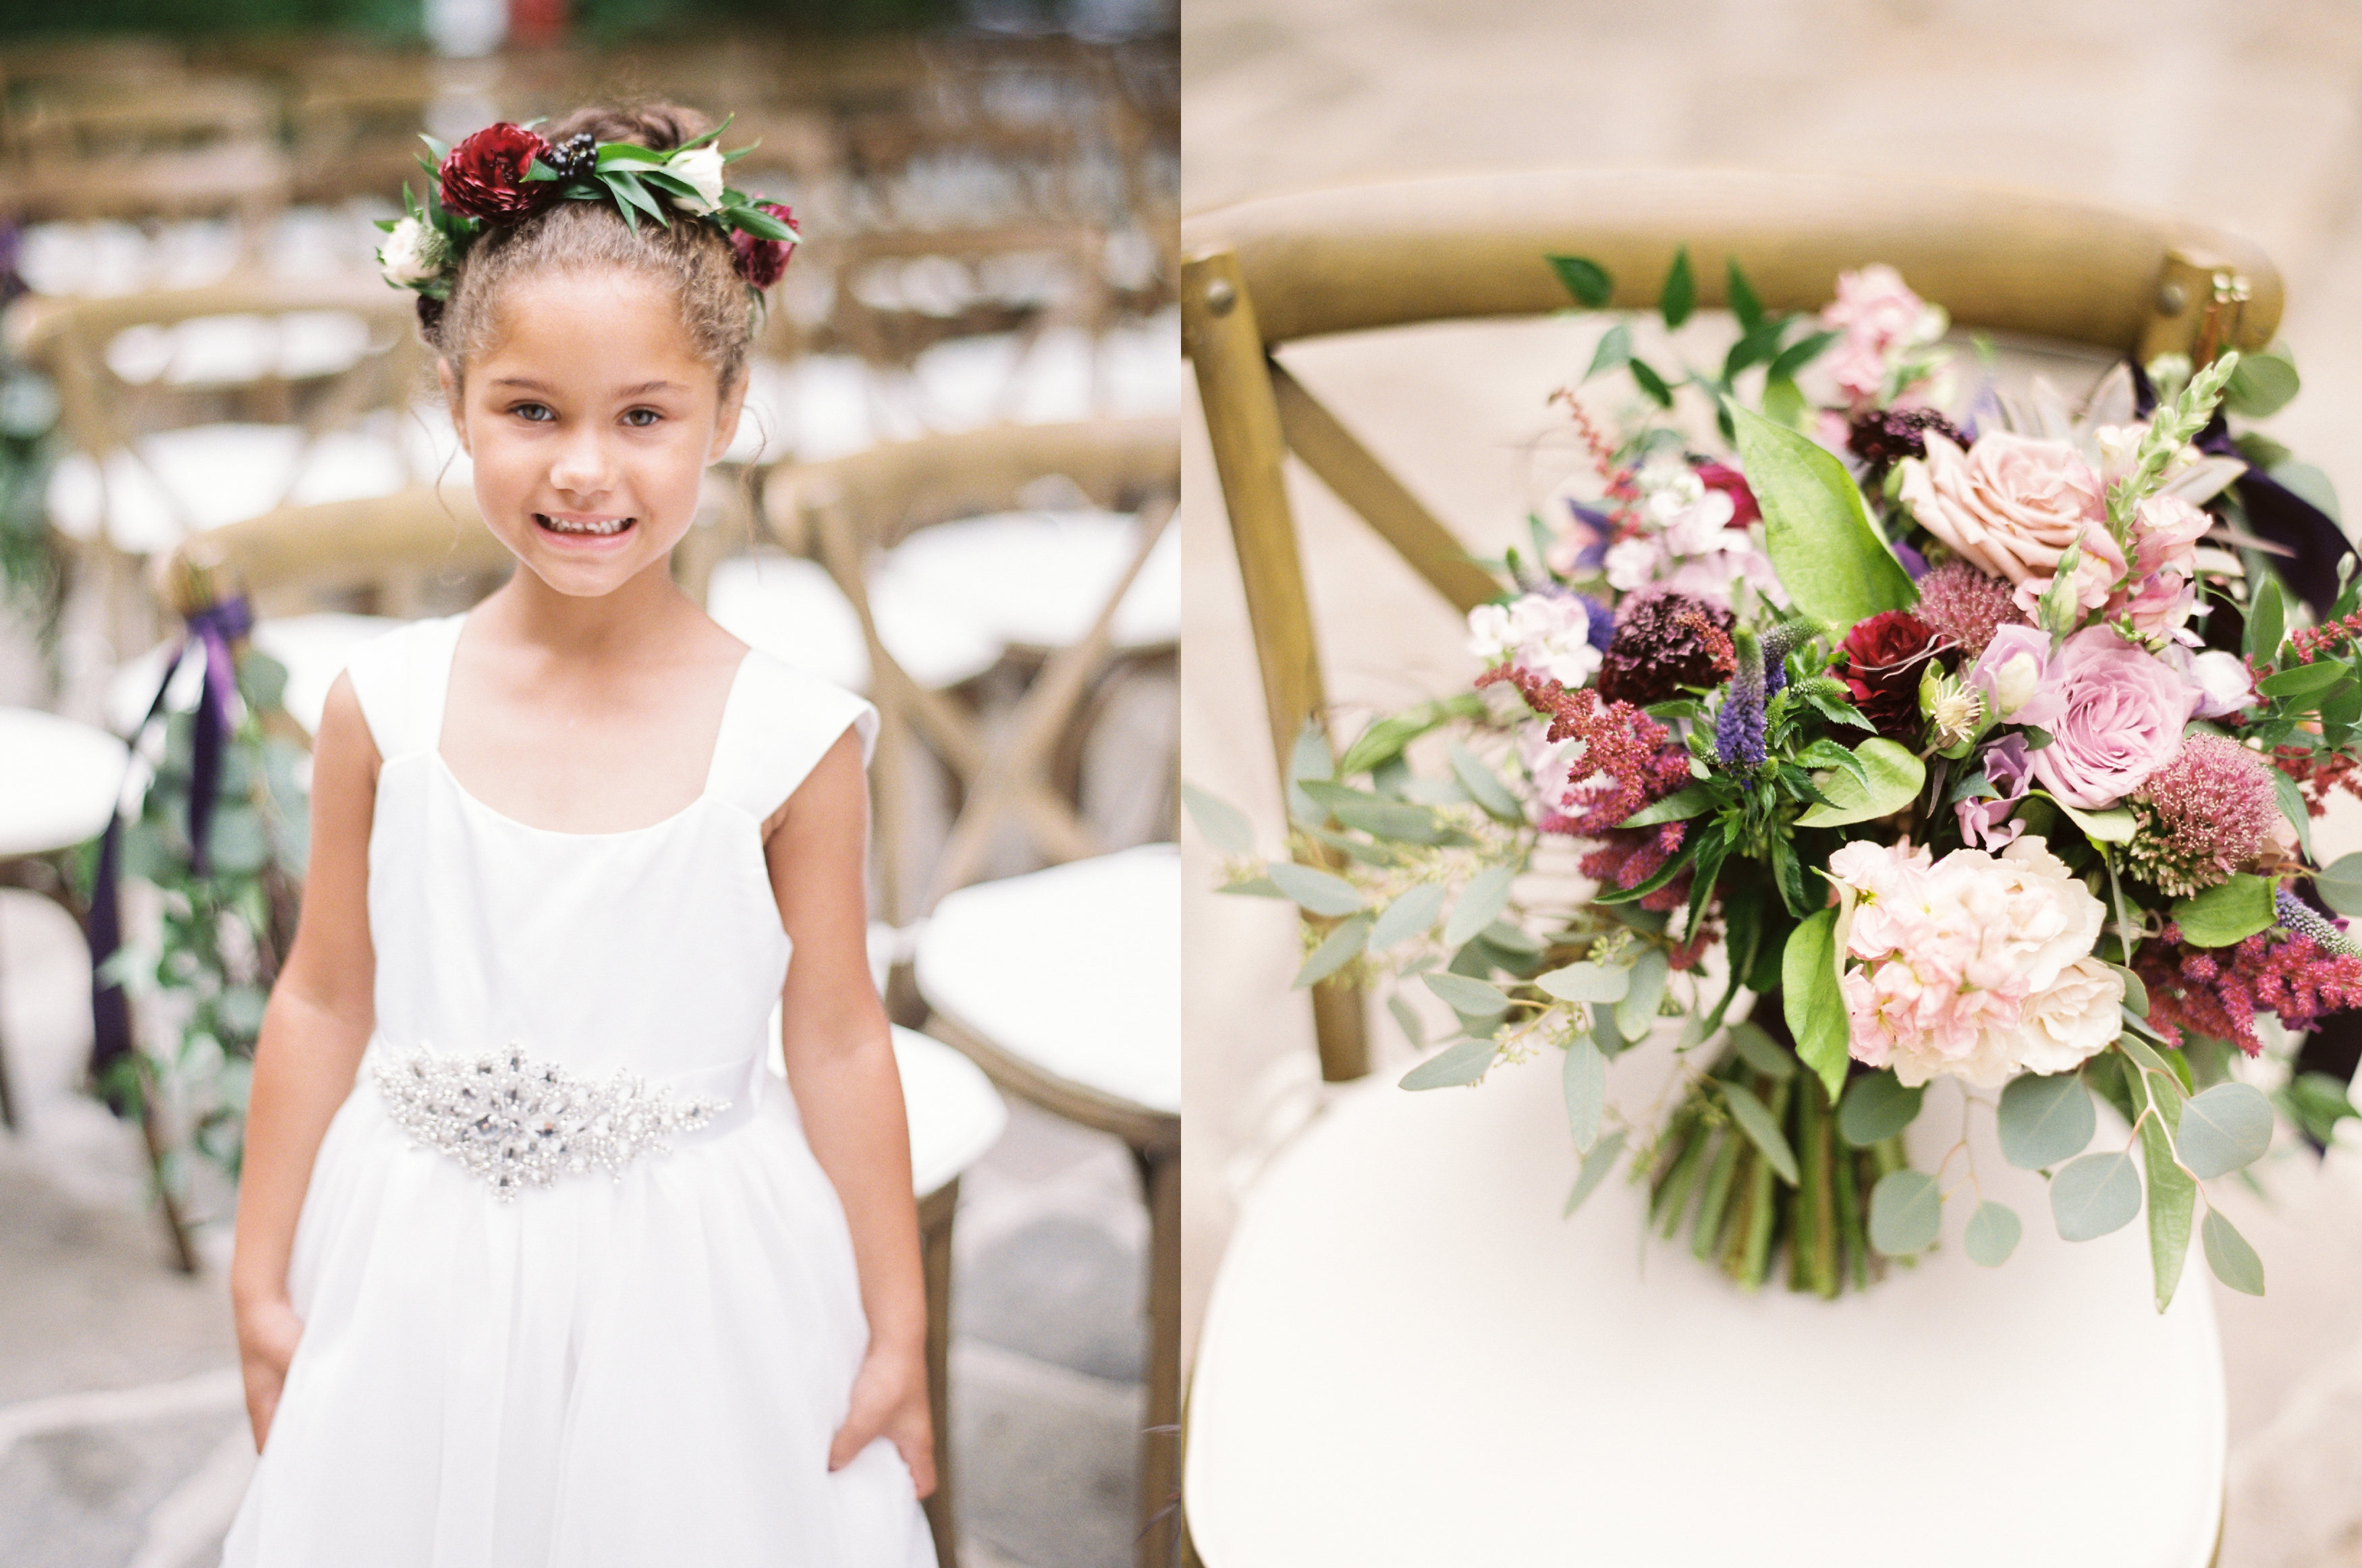 Brides bouquet and flower girl